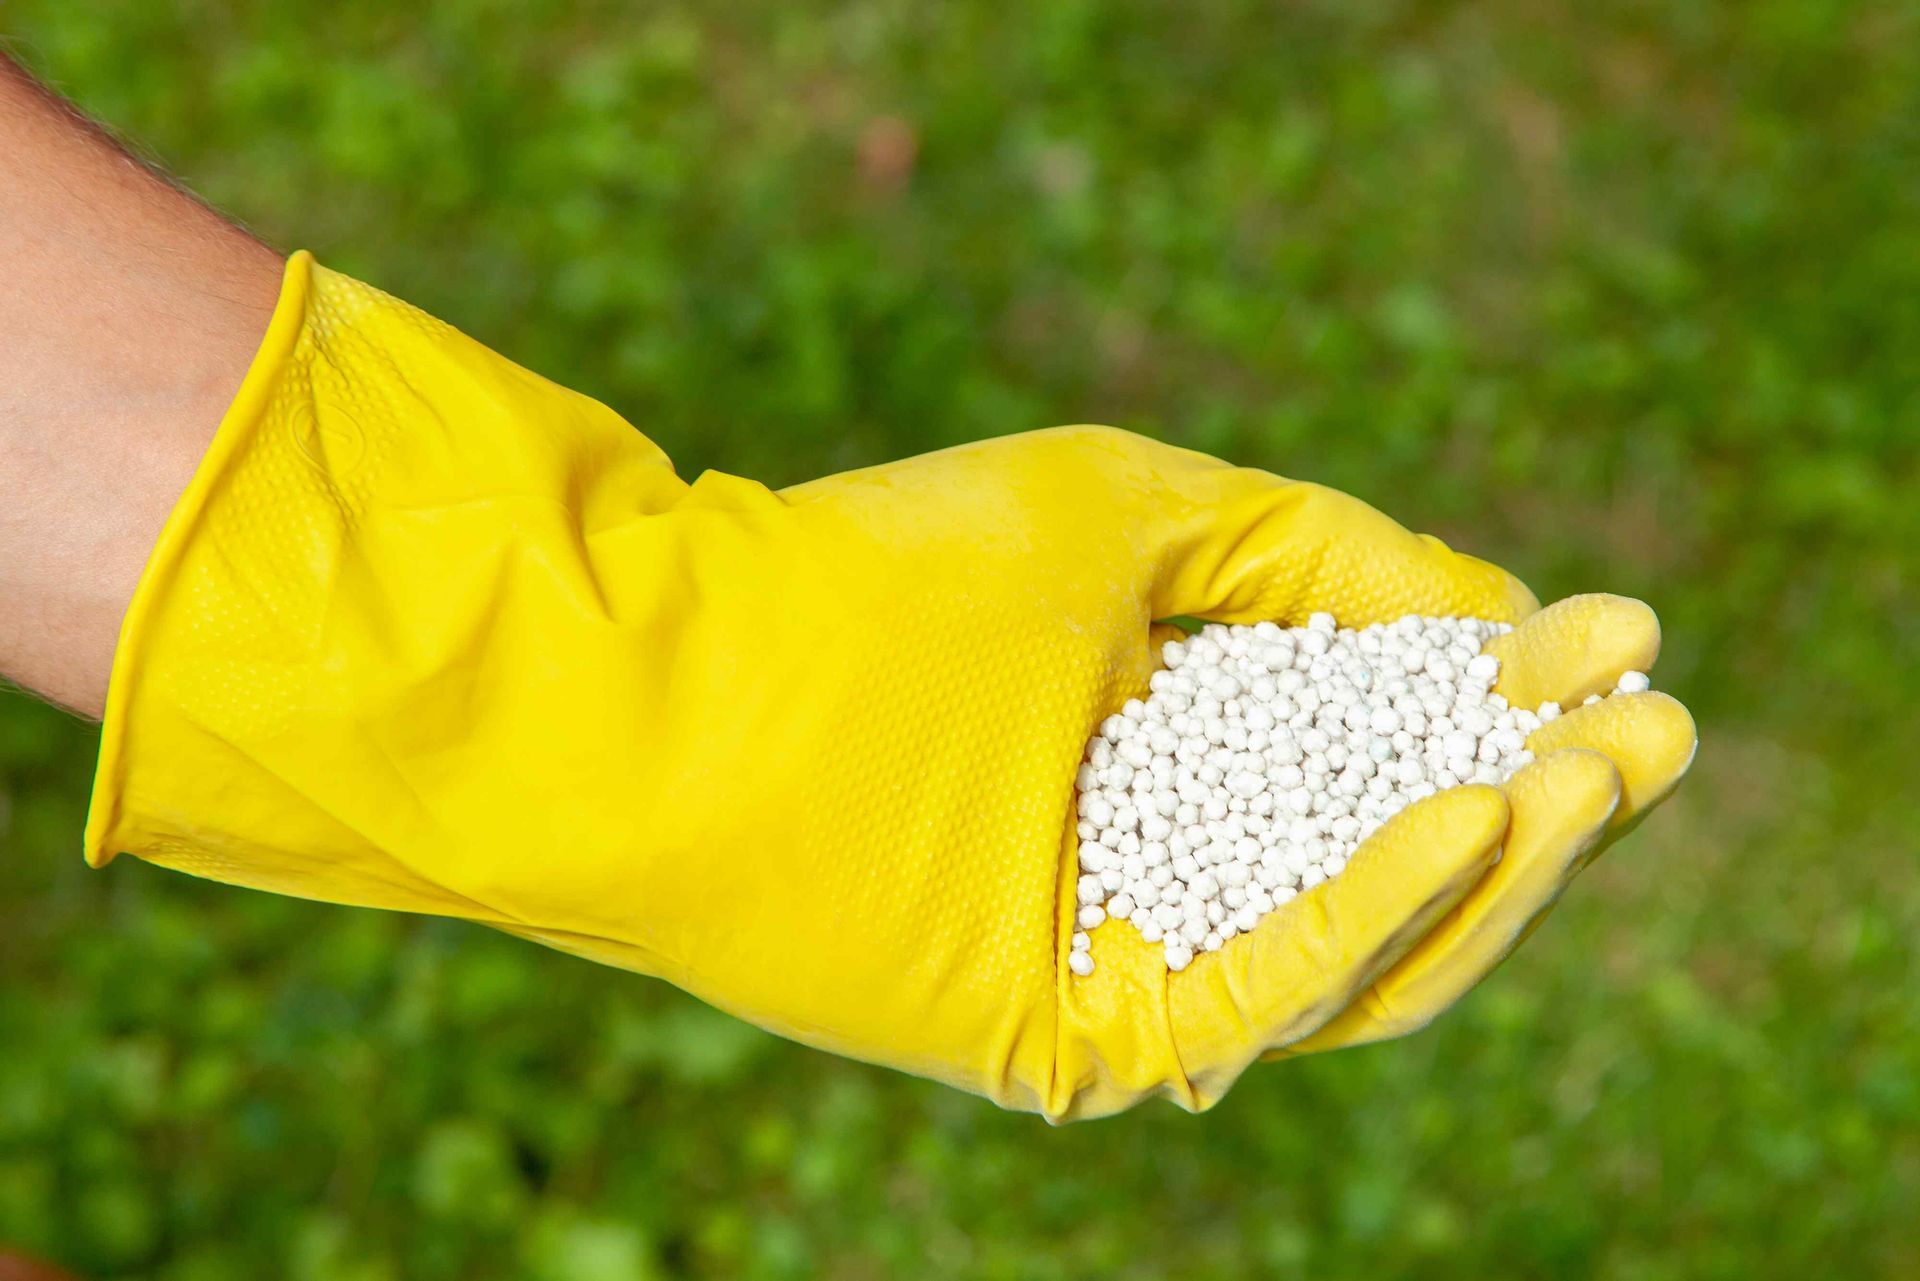 Yellow glove with handful of fertilizer